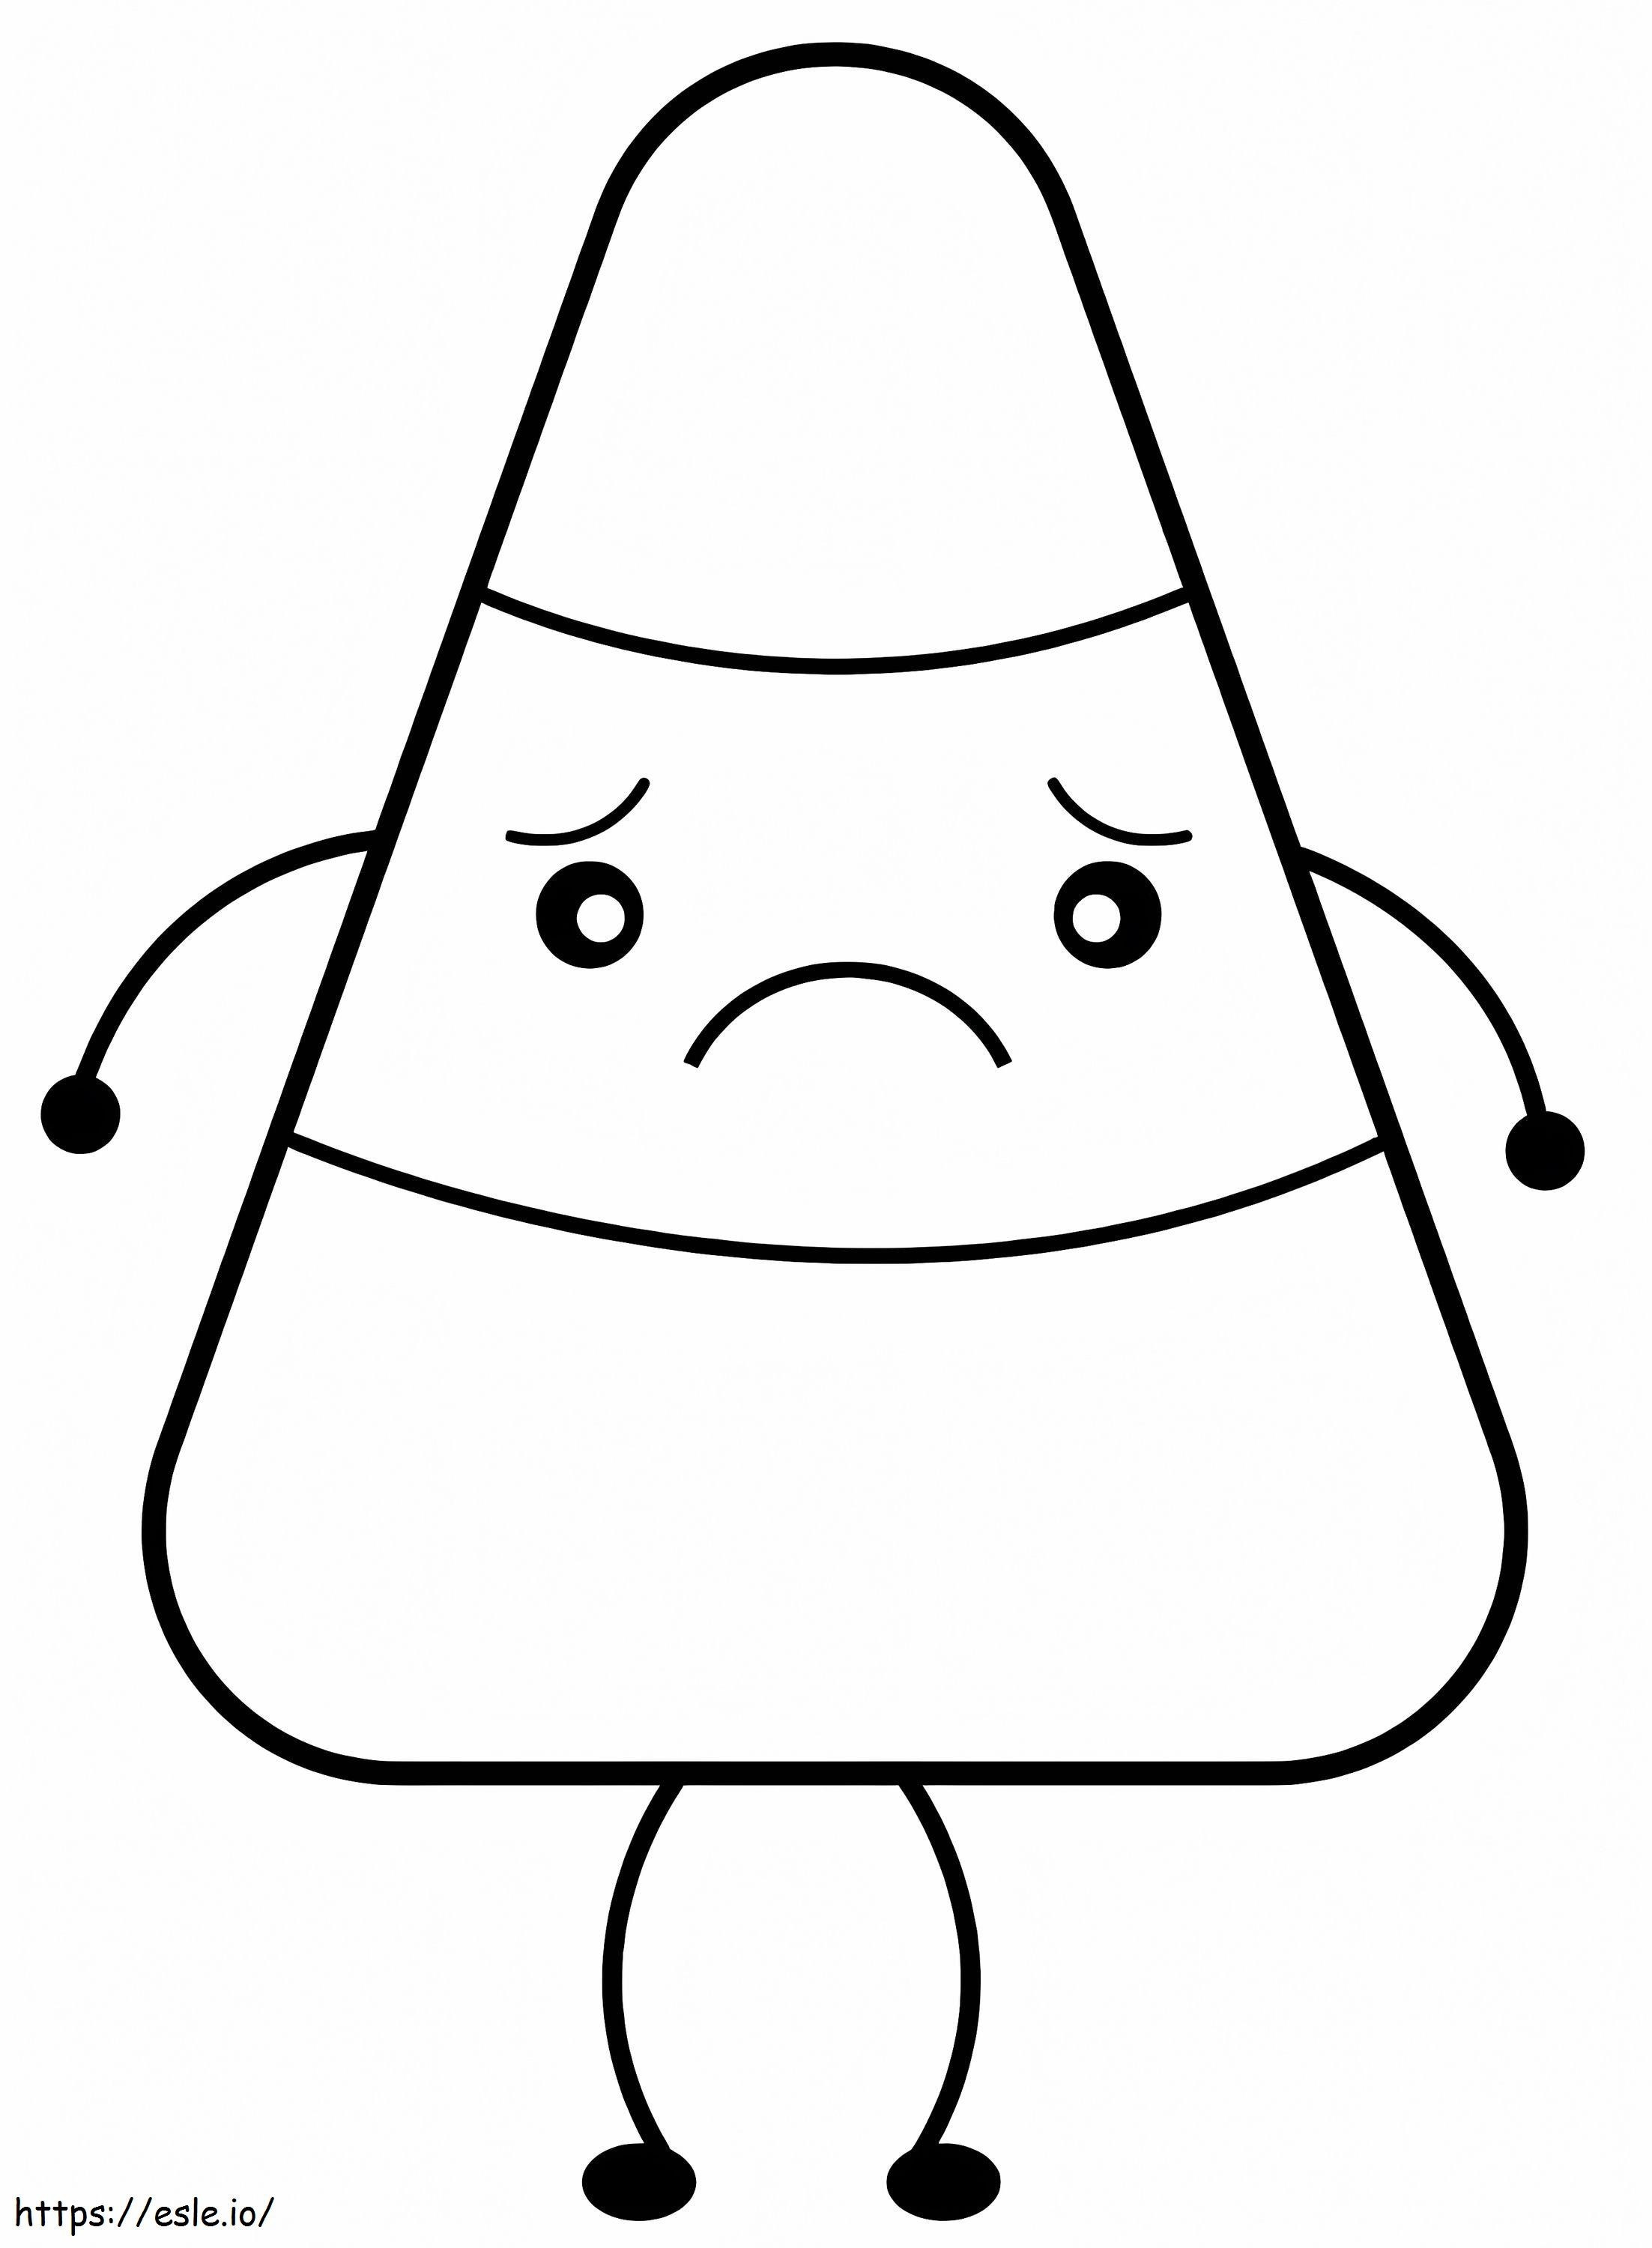 Sad Candy Corn coloring page